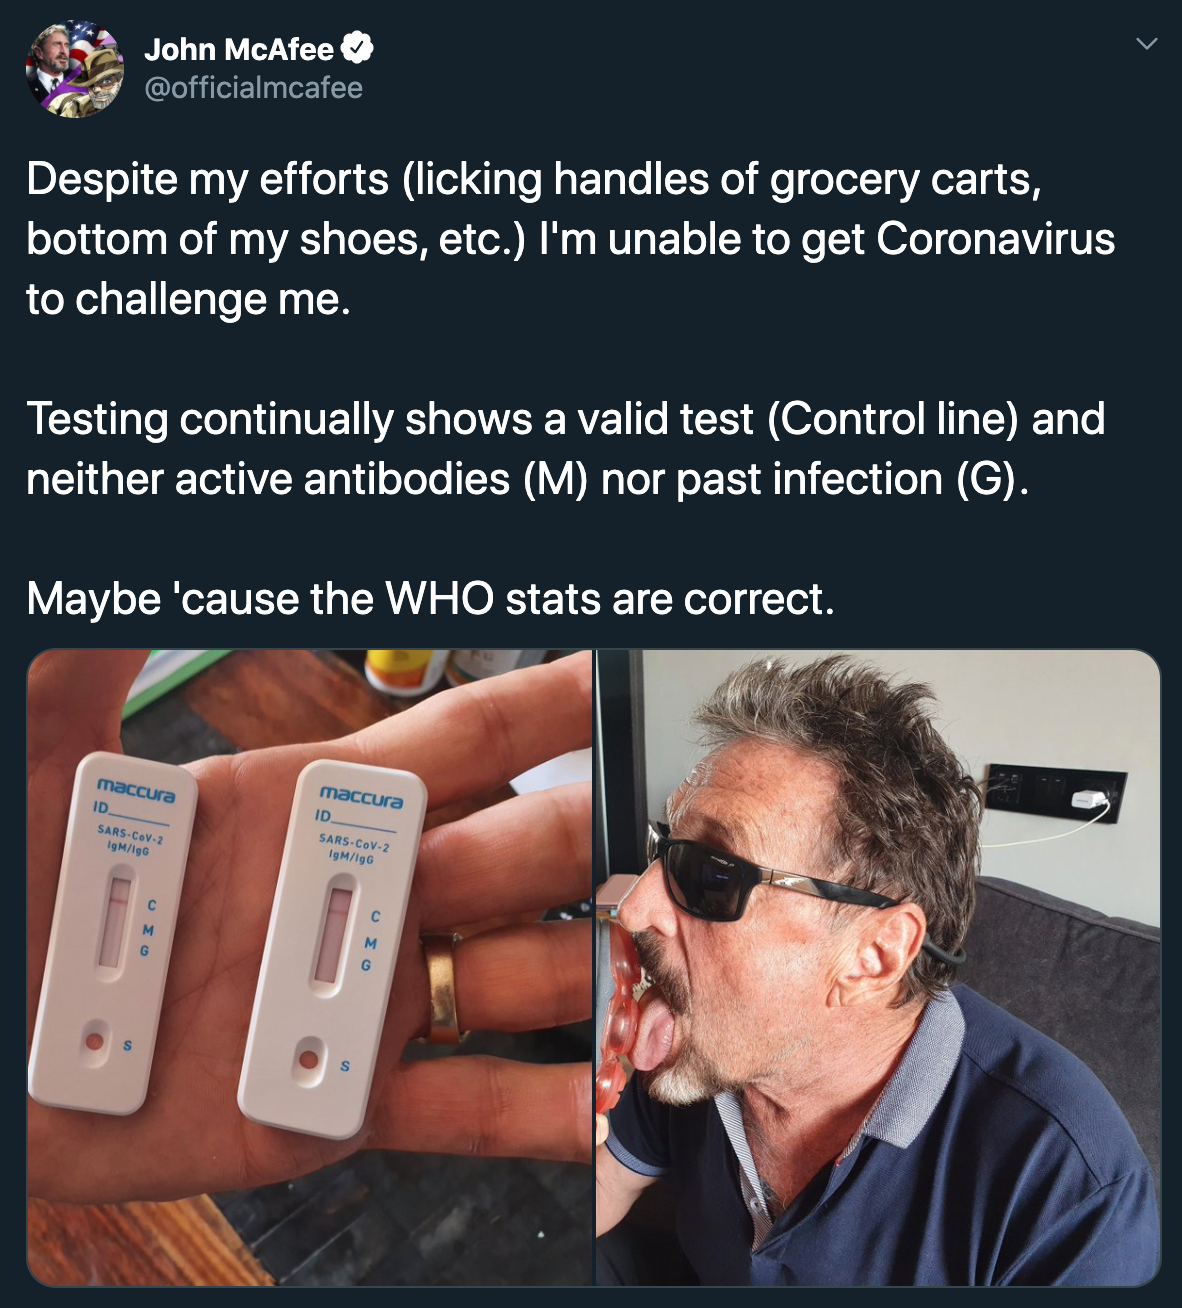 John McAfee Despite my efforts licking handles of grocery carts, bottom of my shoes, etc. I'm unable to get Coronavirus to challenge me. Testing continually shows a valid test Control line and neither active antibodies M nor past infection G. Maybe 'cause